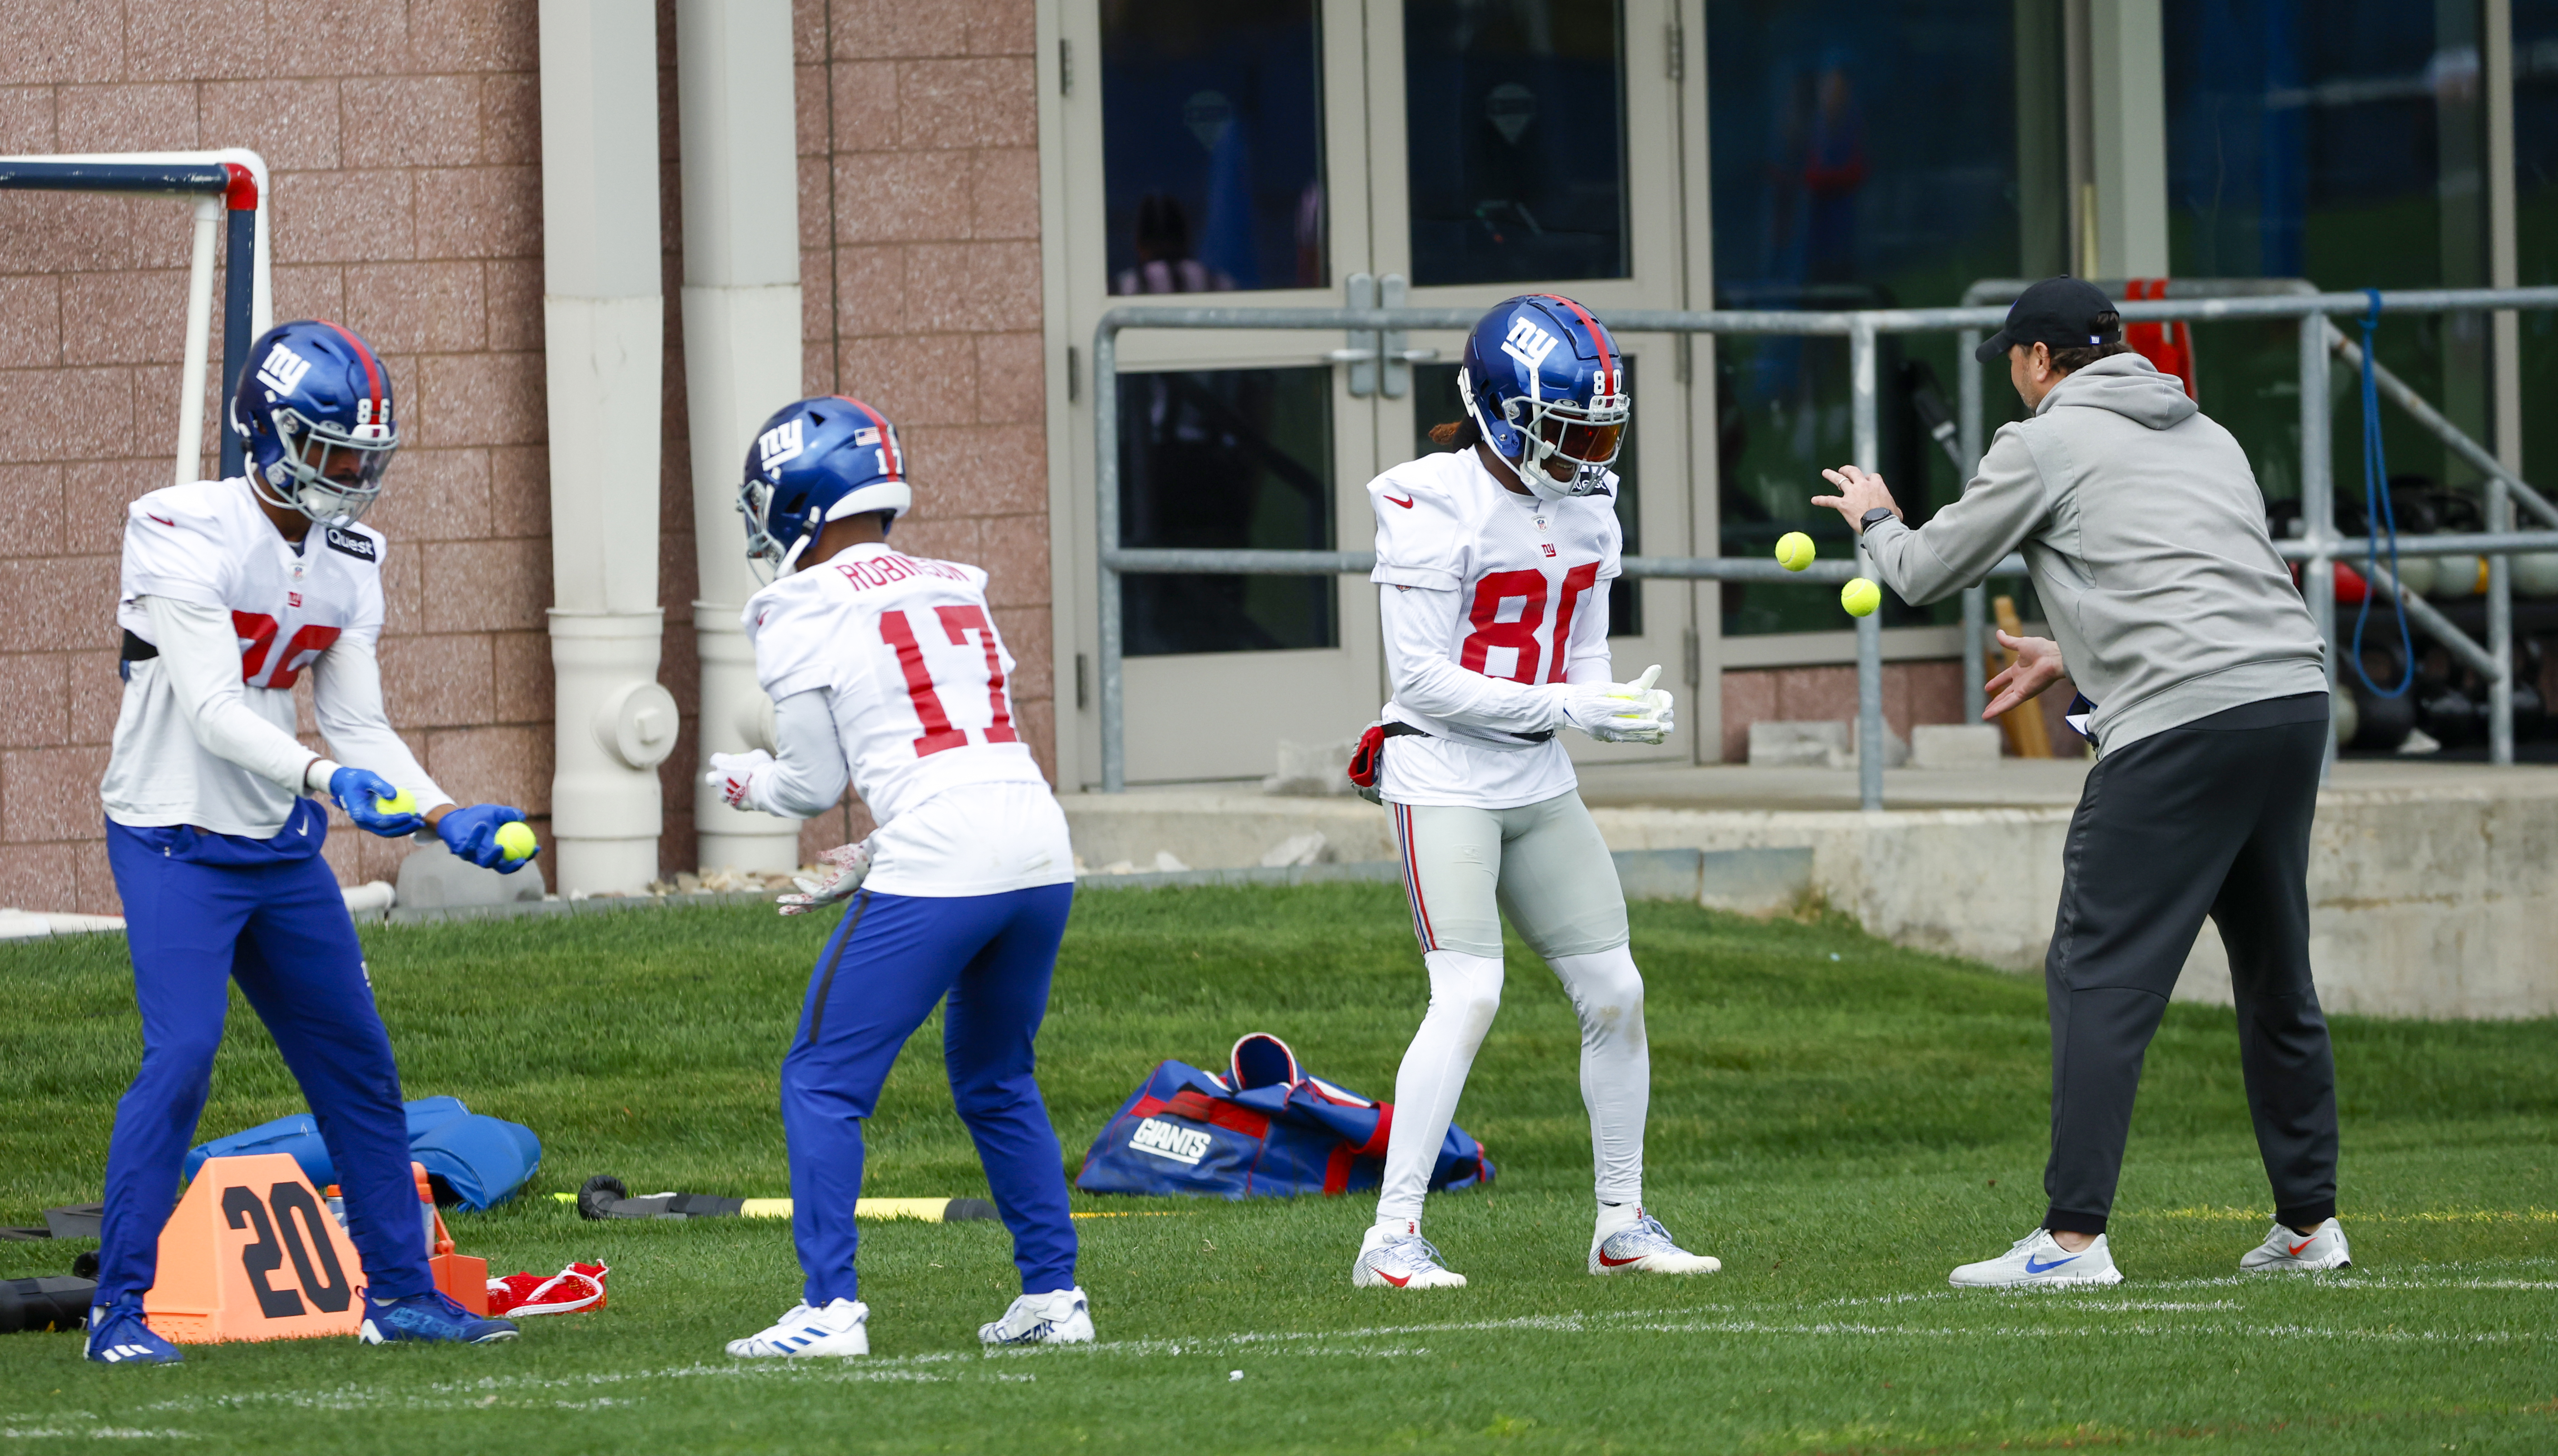 New York Giants wide receivers Darius Slayton (86), Wan'Dale Robinson (17), Richie James (80) and wide receivers coach Mike Groh work with tennis balls during practice on Wednesday, Oct. 26, 2022. 